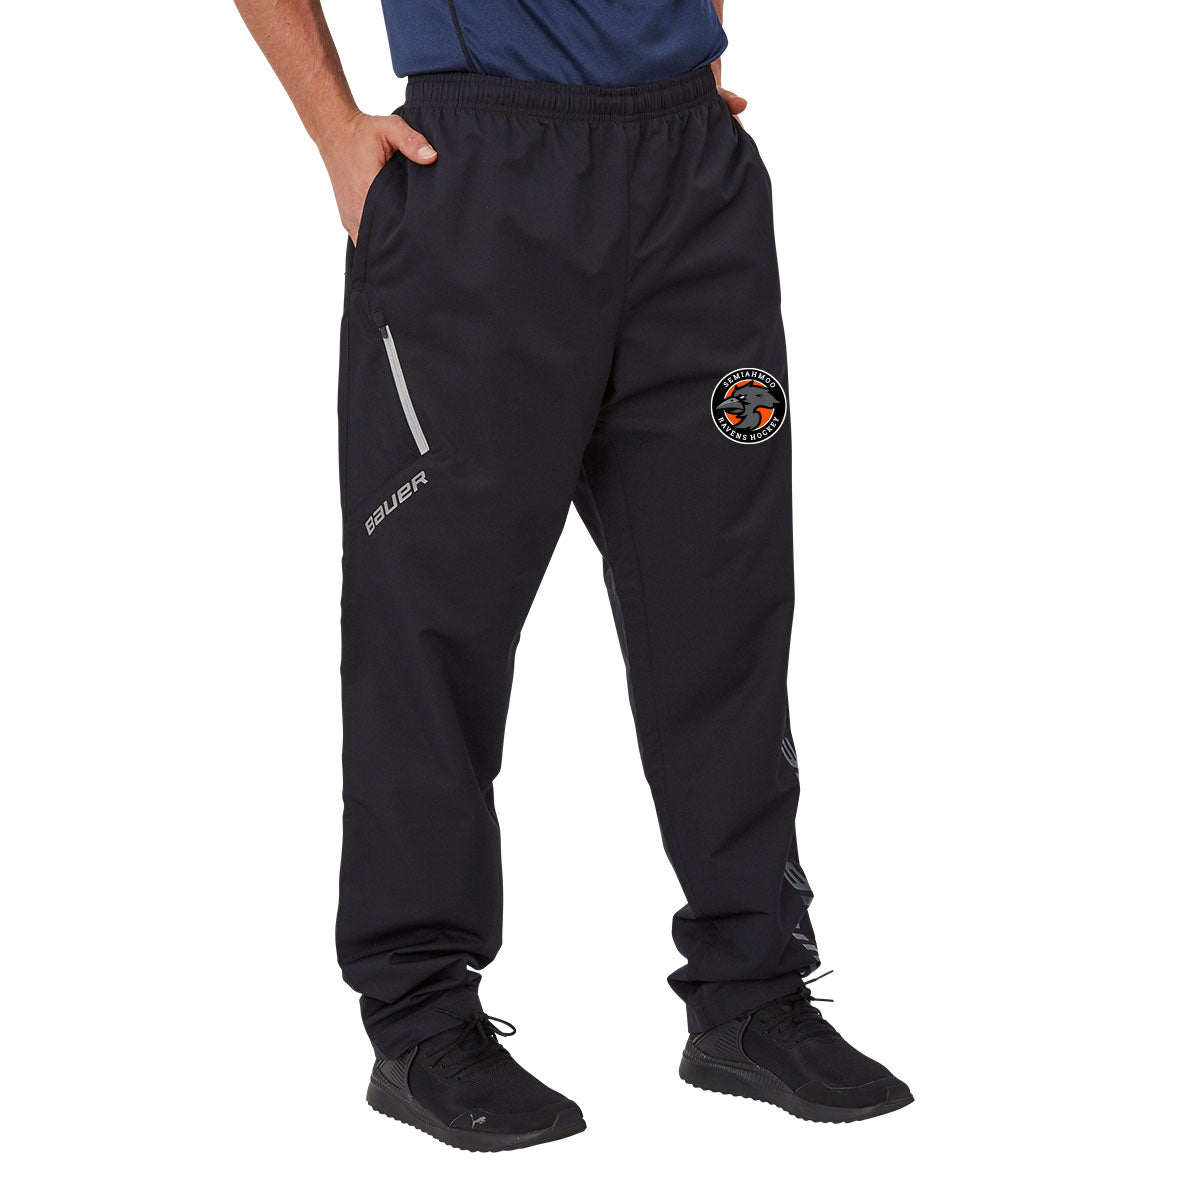 BAUER HOCKEY LIGHTWEIGHT PANT YOUTH